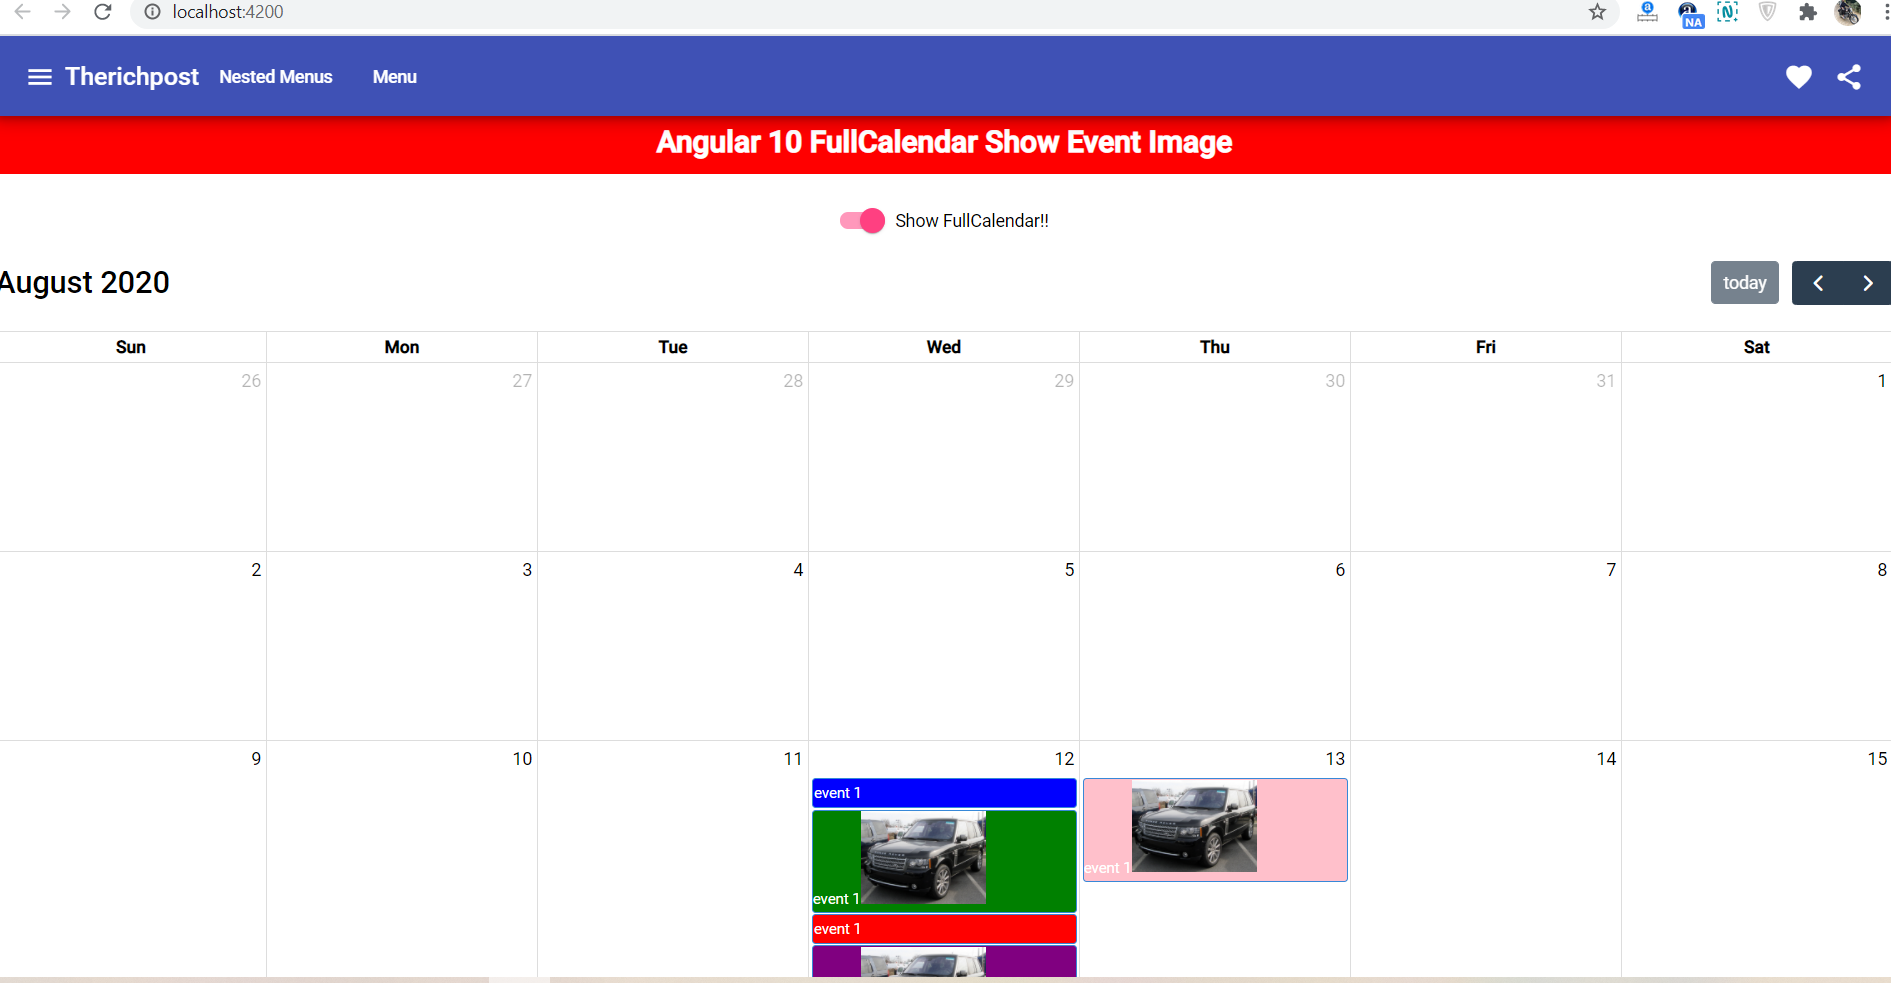 How to show event image in fullcalendar in angular 10?